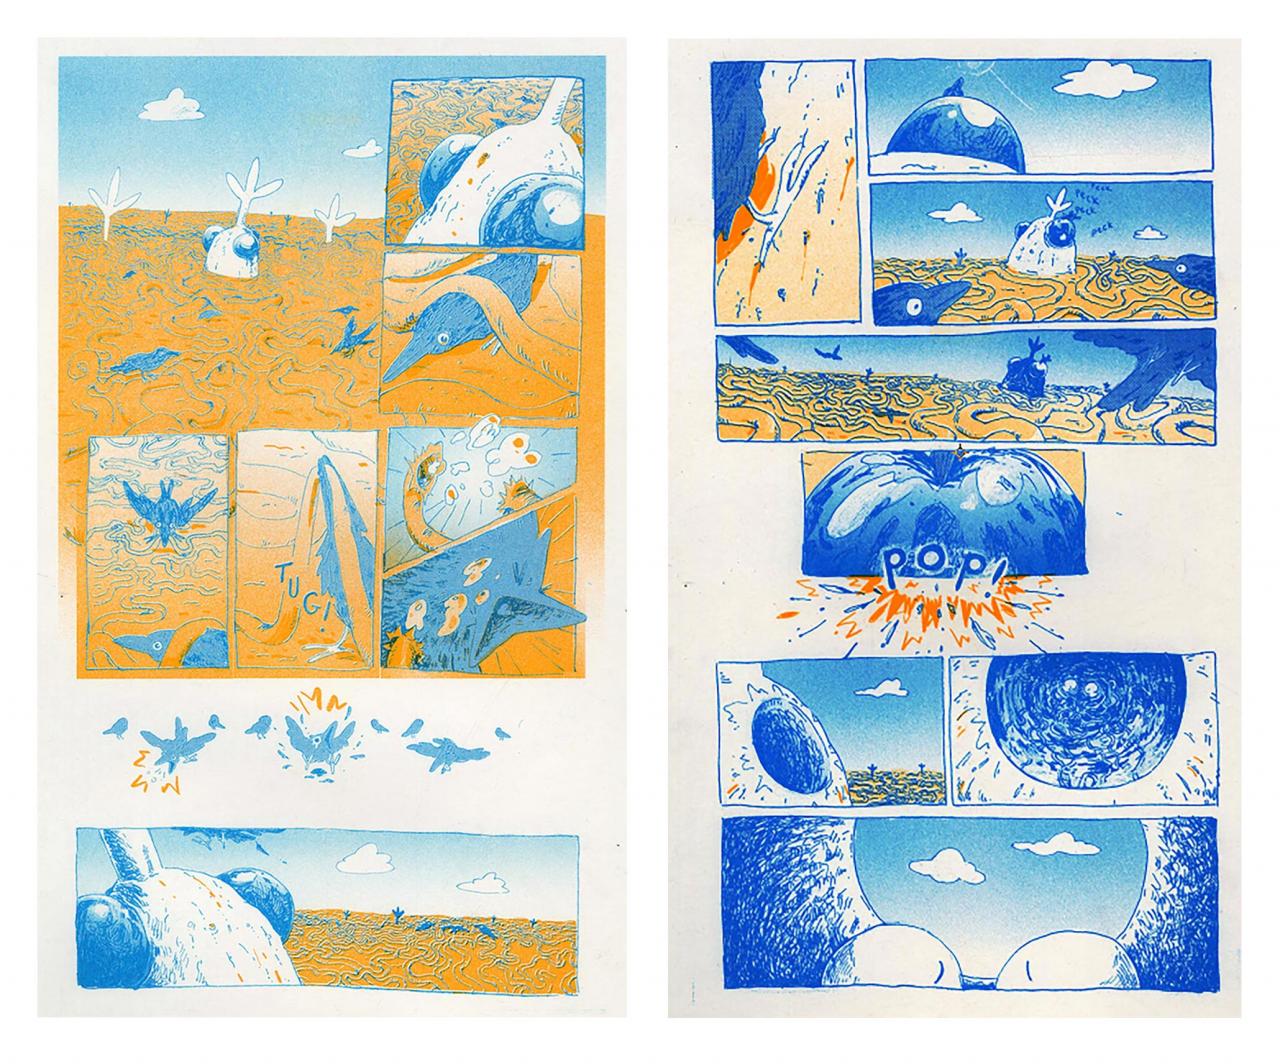 Comic pages by Katie Healey